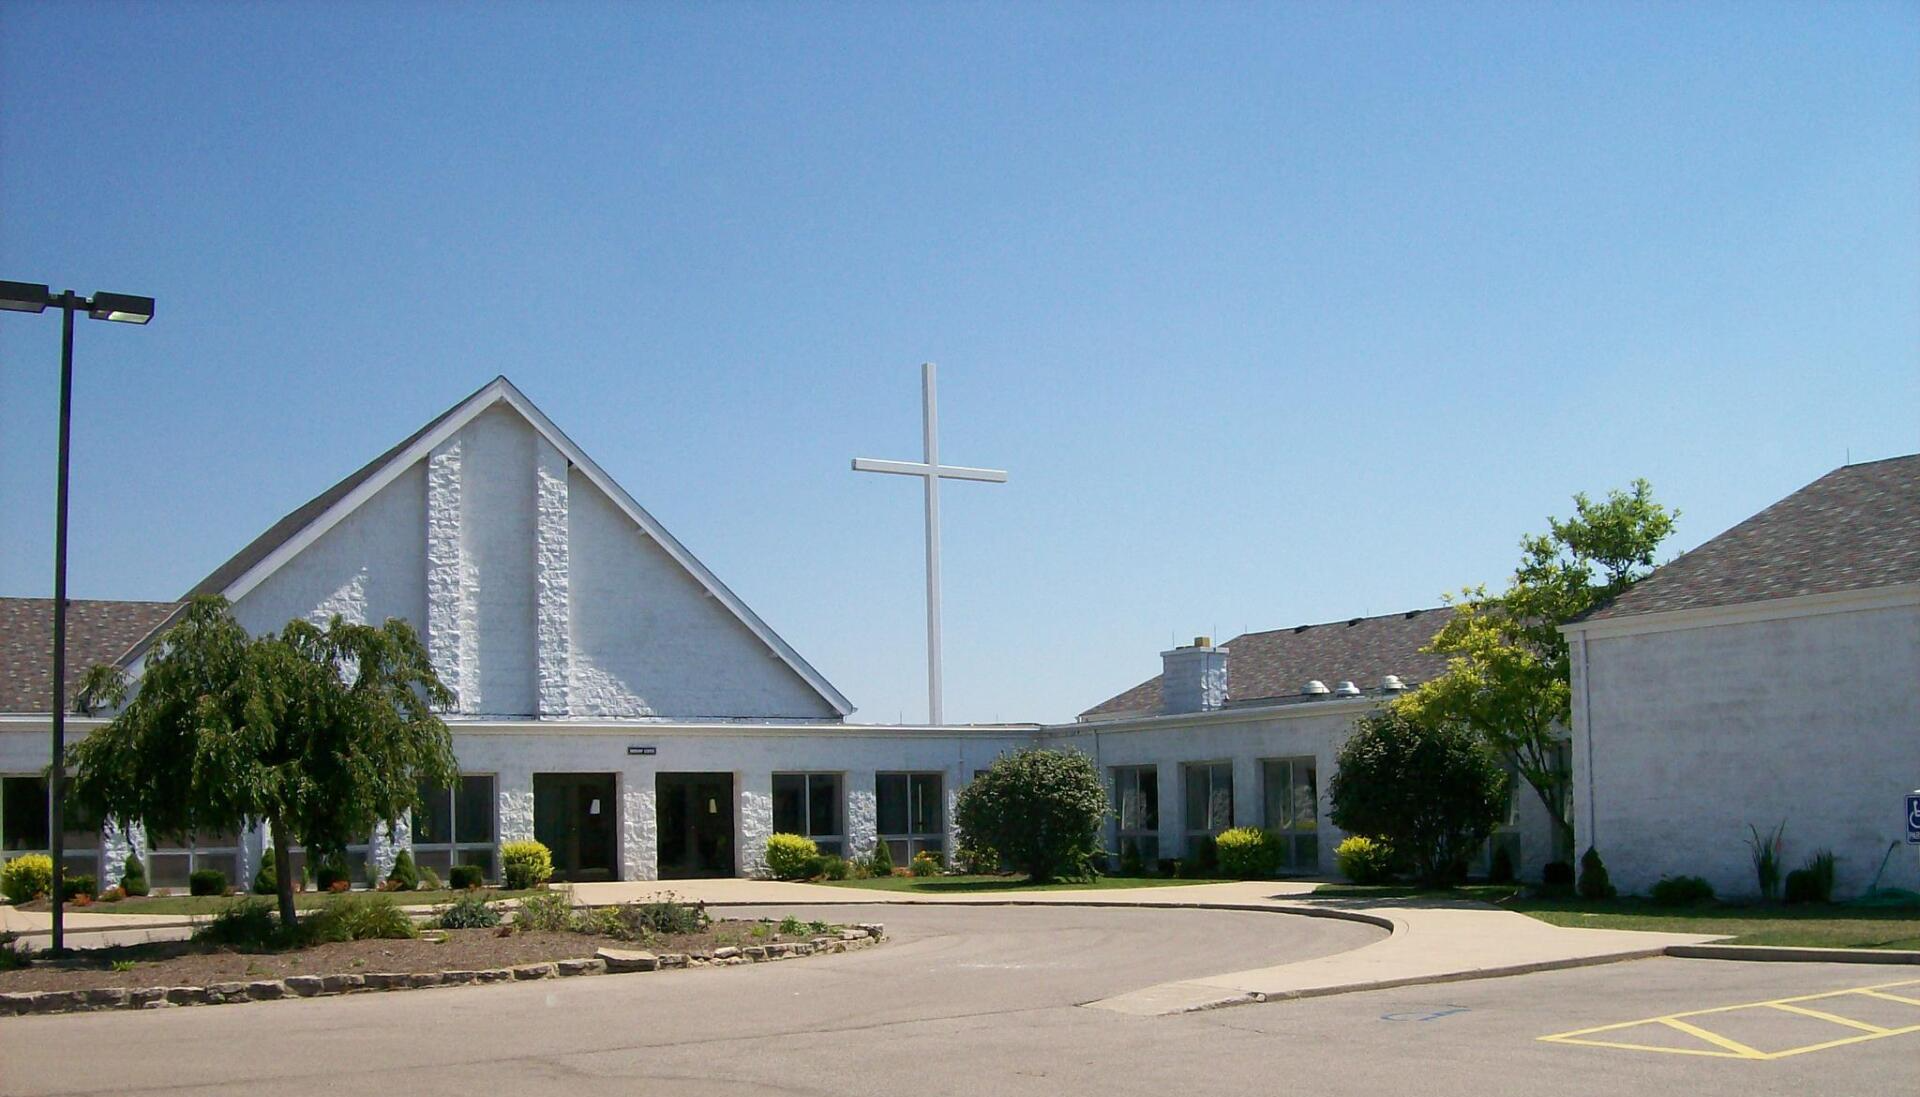 outside of church front